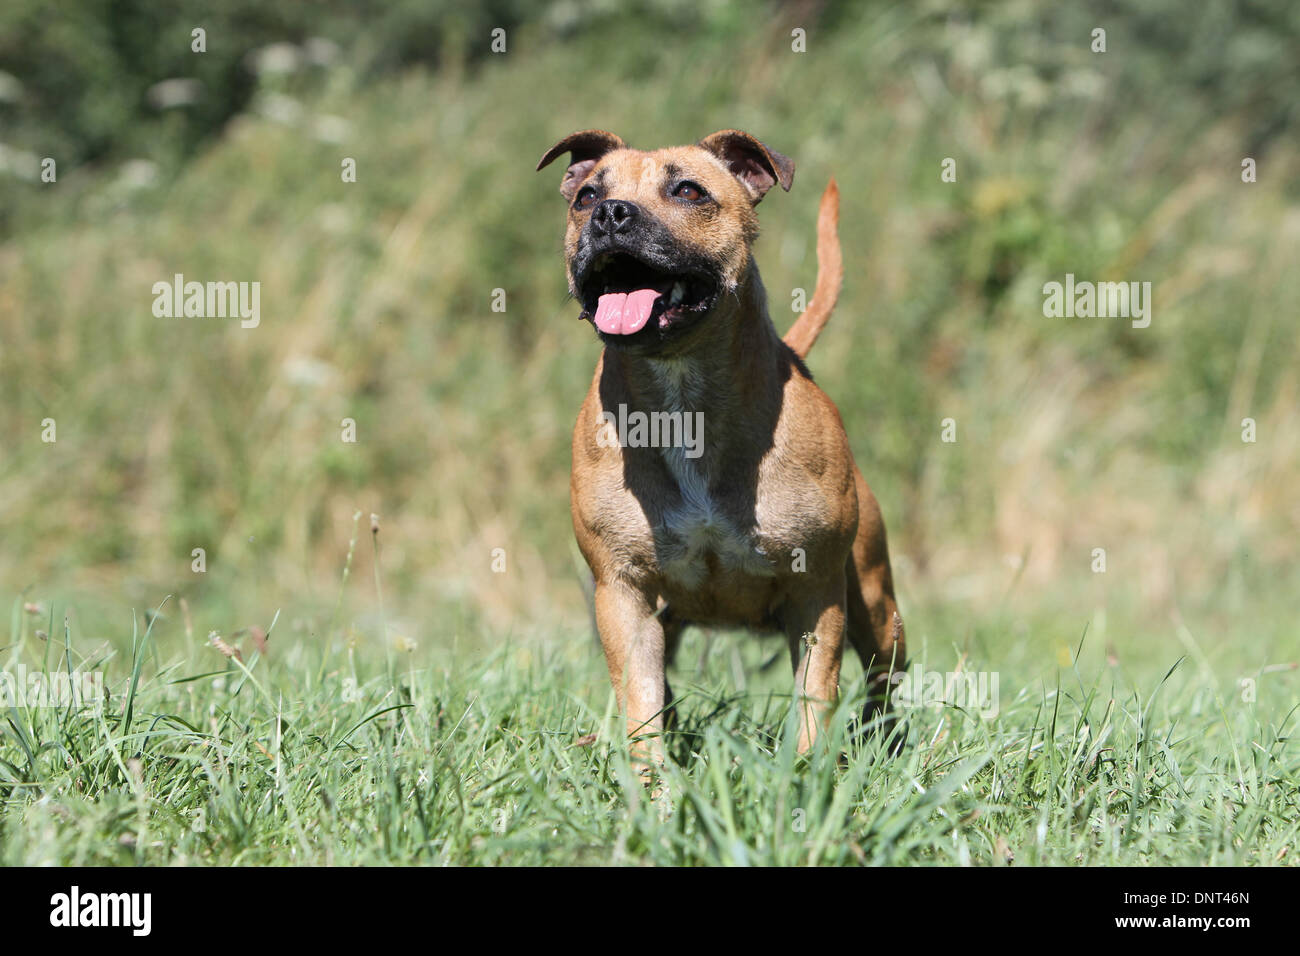 dog Staffordshire Bull Terrier / Staffie  adult standing in a meadow Stock Photo